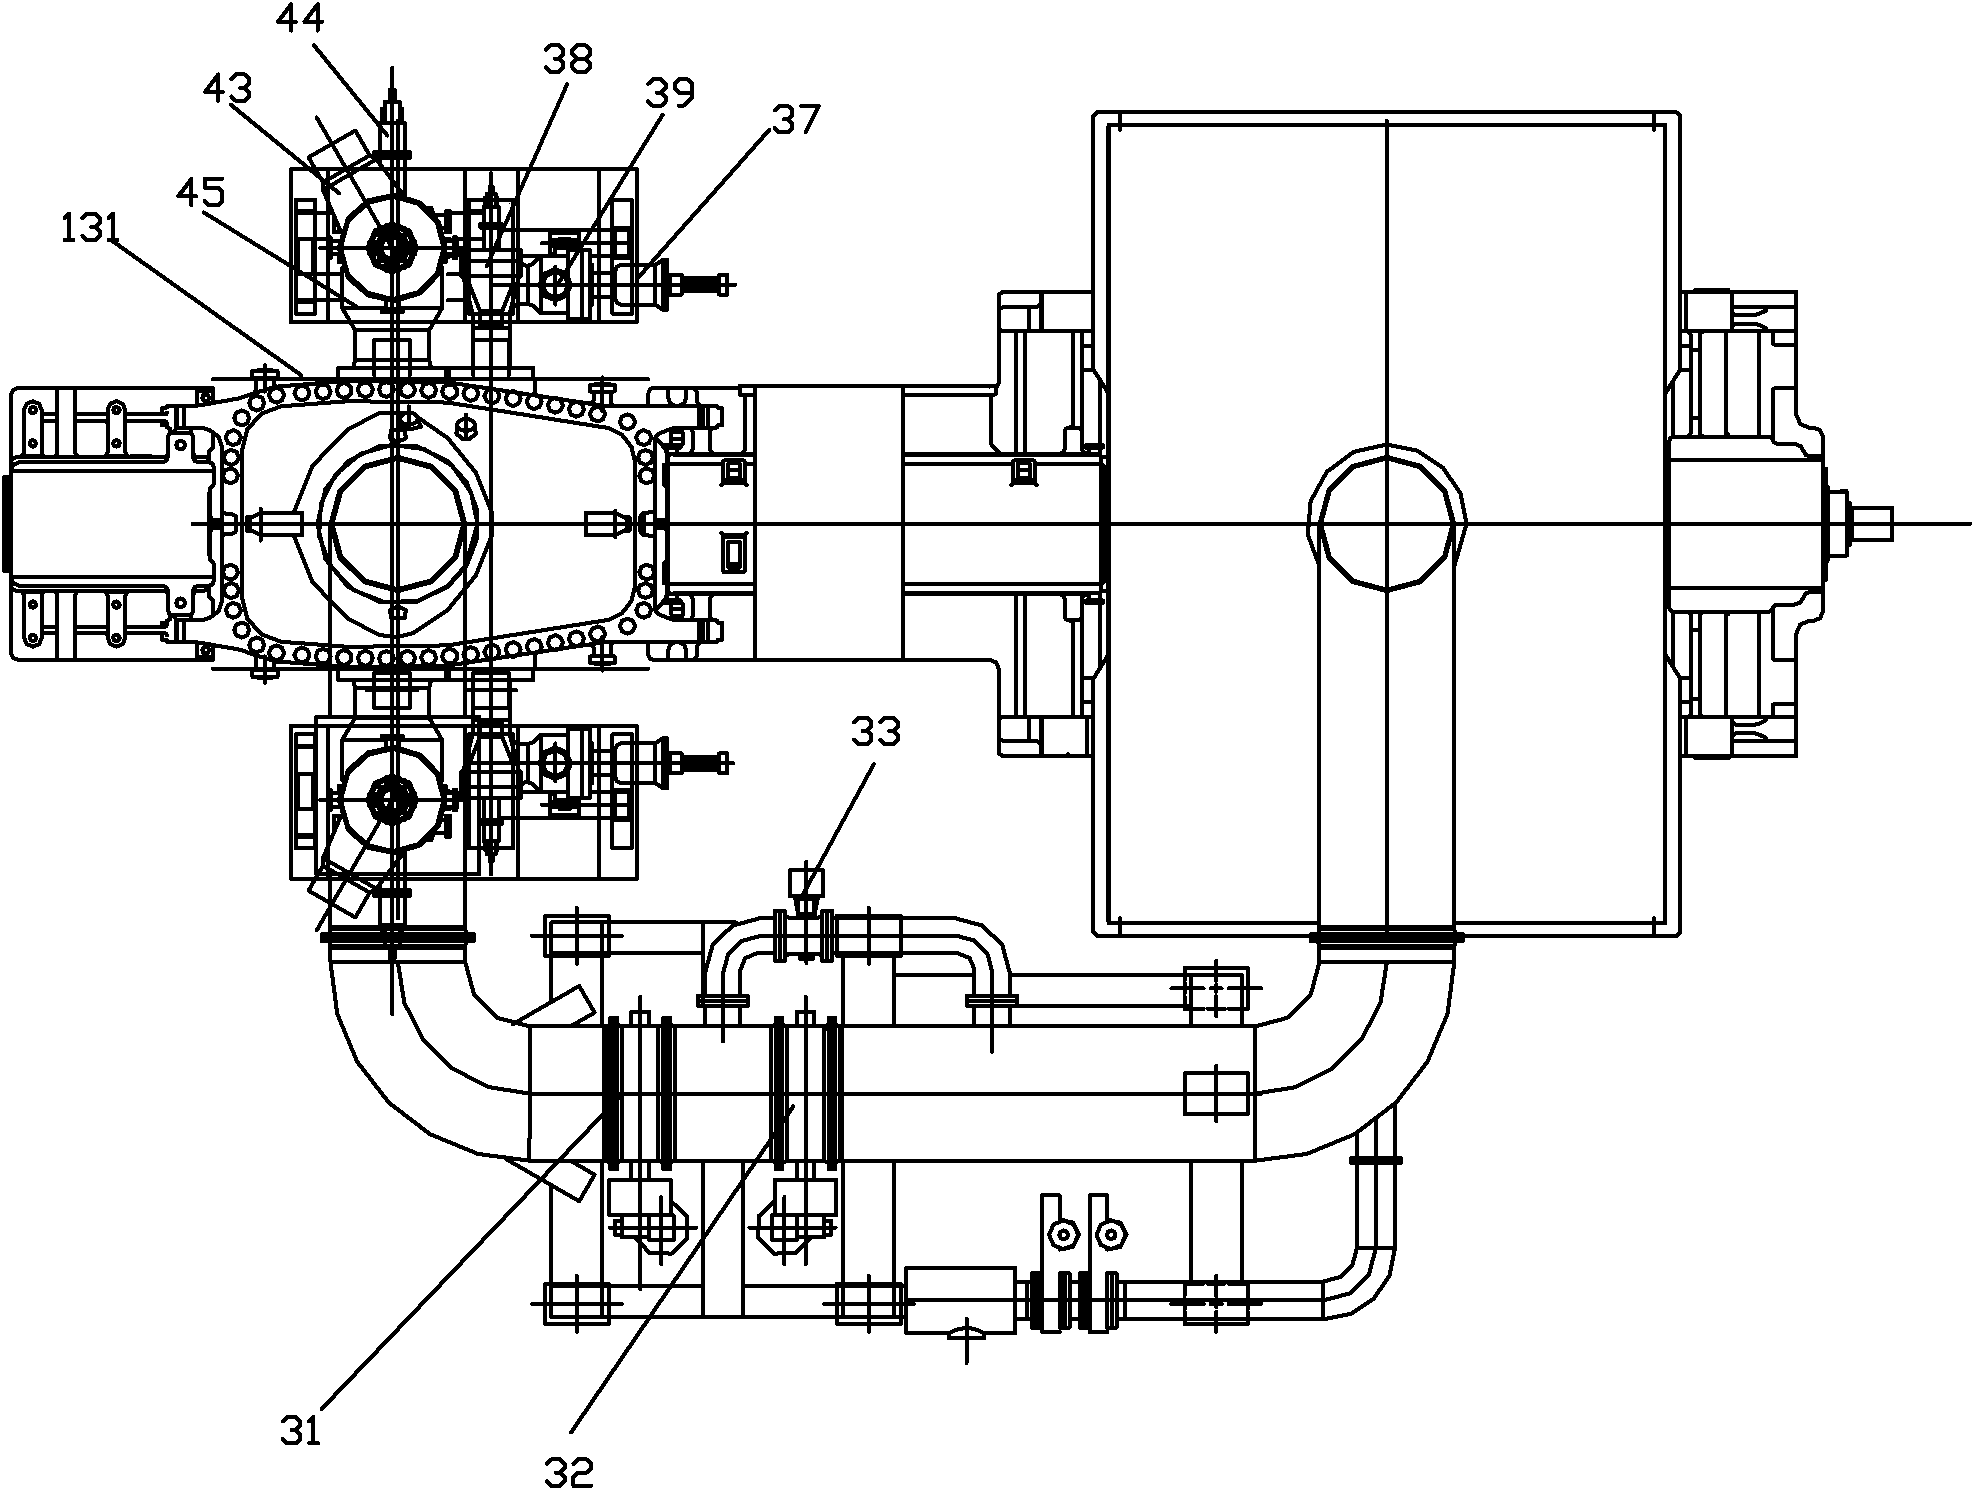 Double-cylinder coaxial combined cycle heat supply gas turbine